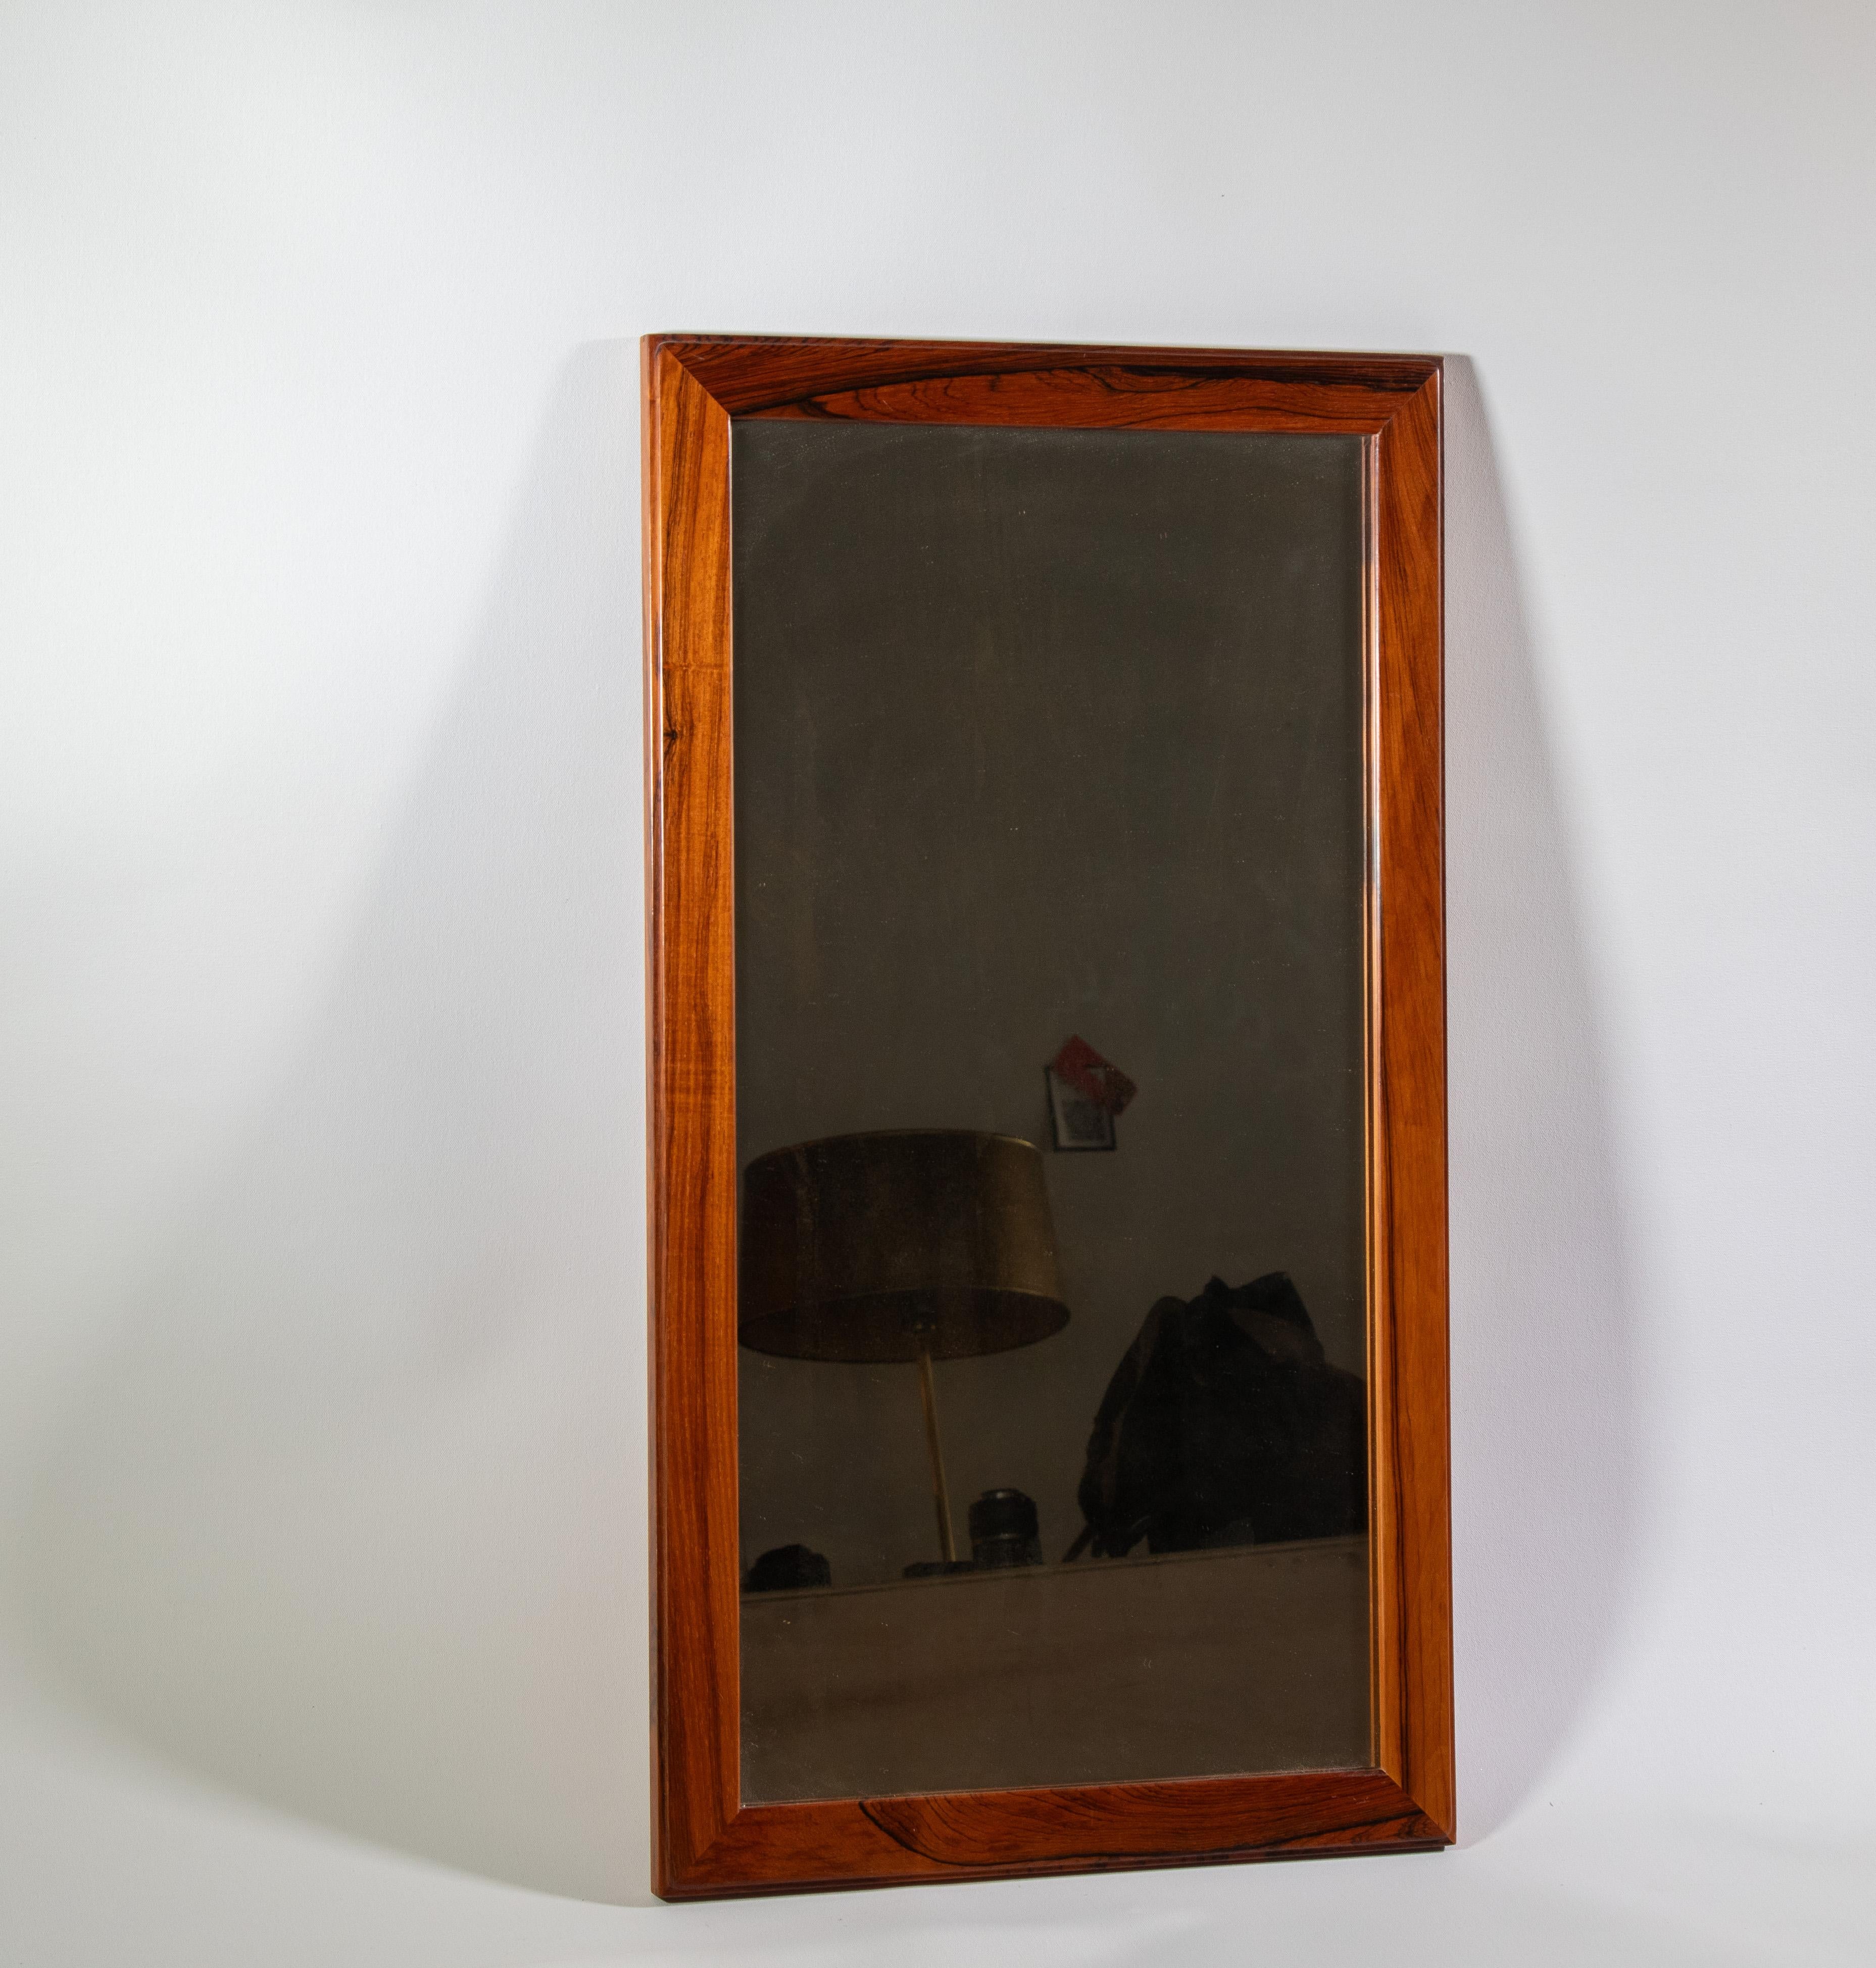 A solid rosewood mirror designed by Aksel Kjersgaard Odder and made in Denmark. A generous size finished in solid rosewood with attractive grain.  The edges feature an inset design, which adds visual interest. A wire is present and allows the mirror